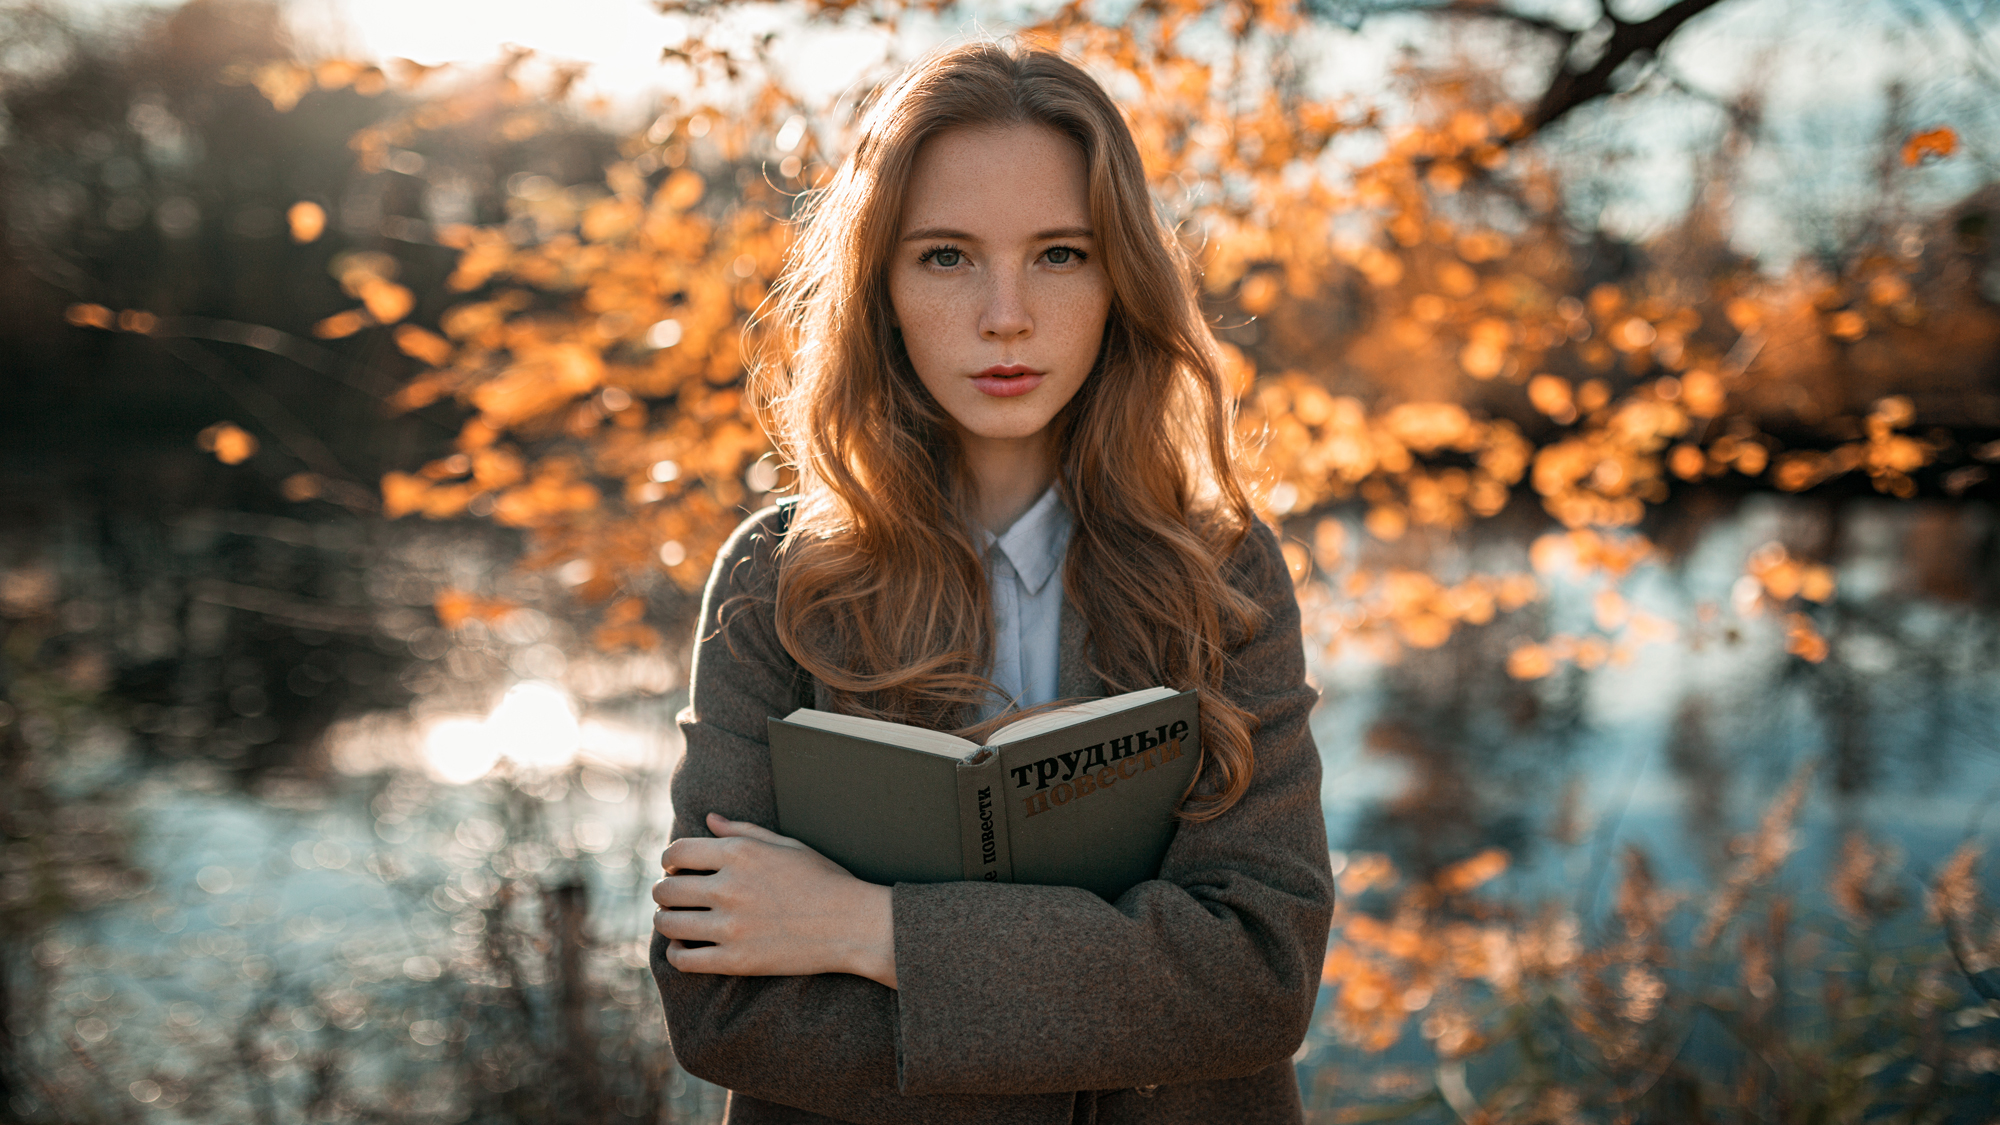 People 2000x1125 women model redhead long hair looking at viewer outdoors freckles coats books forest trees fall water backlighting lake sunset sunlight depth of field arms crossed women outdoors Aleksandr Kurennoi Russian grey coat blue shirt Anastasia